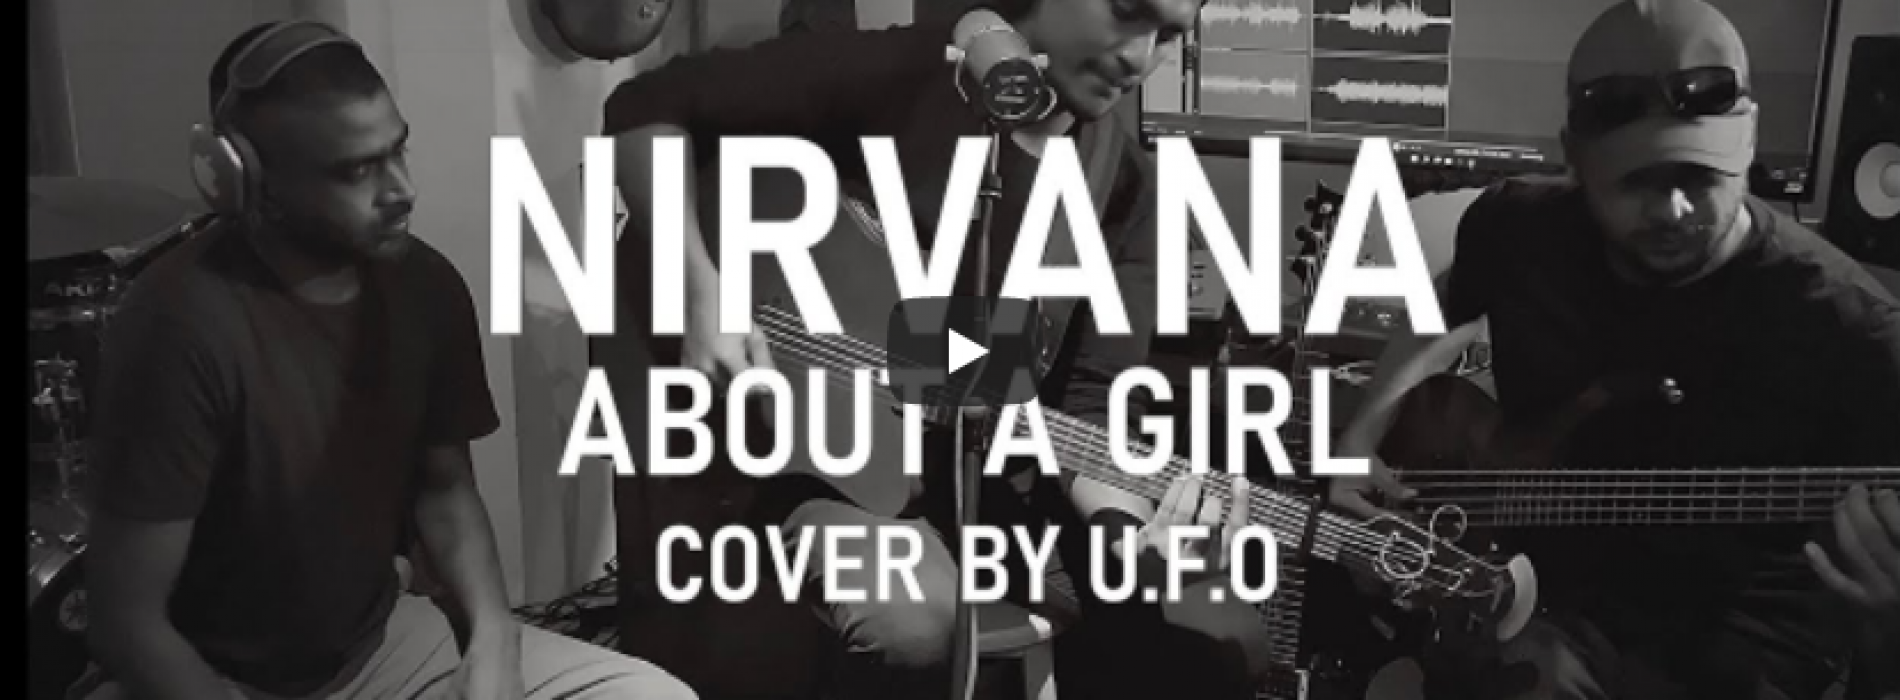 New Music : Nirvana – About A Girl (Cover by U.F.O)